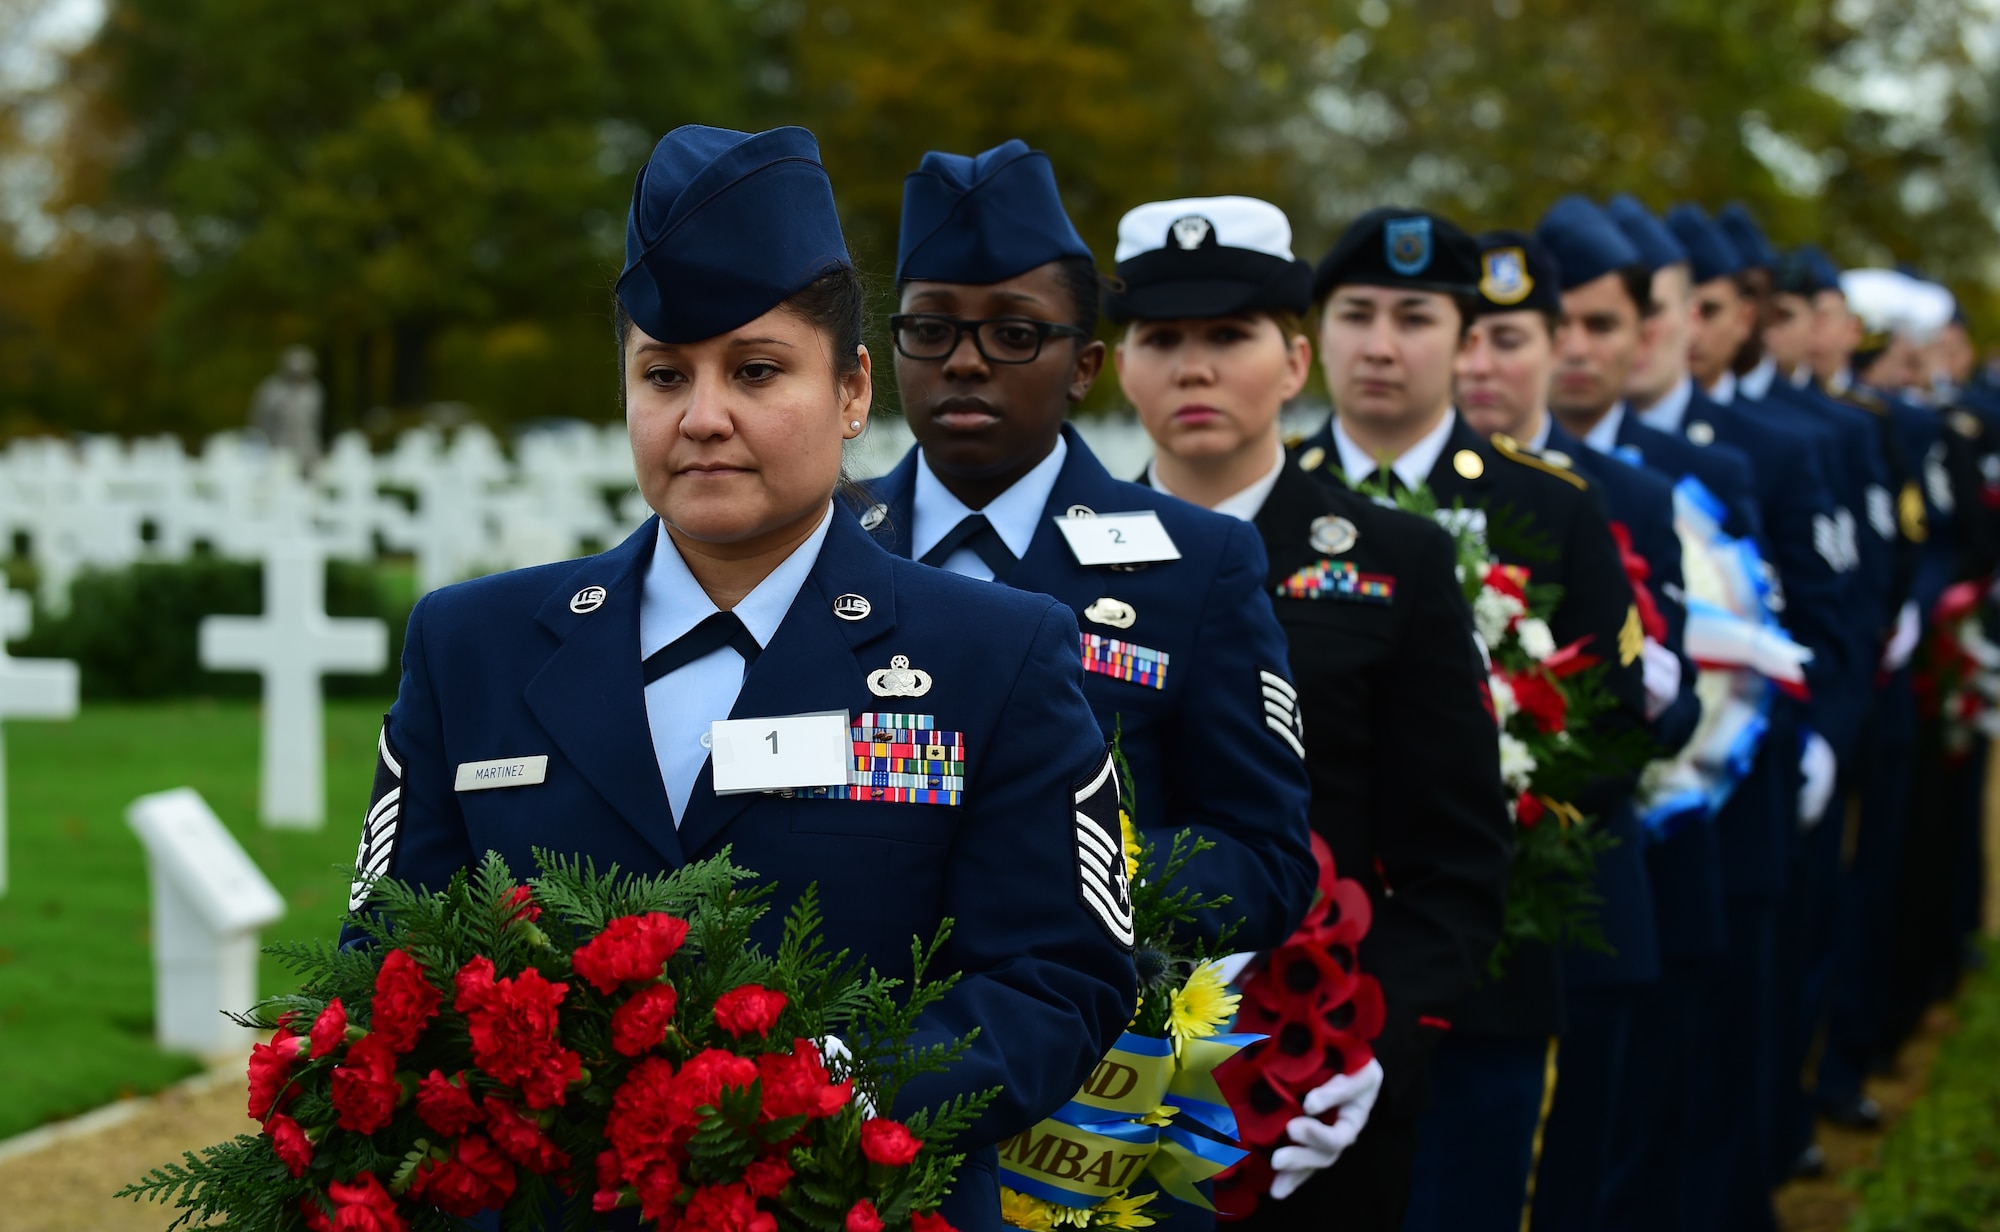 U.S. Air Force Master Sgt. Jackie Martinez, 501st Combat Support Wing logistics superintendent, and other Service members from the 501st CSW and tenant units at RAF Molesworth, carry wreaths during the Veterans Day ceremony at Cambridge American Cemetery, United Kingdom, Nov. 11, 2015. The wreaths were laid in honor the military members past and present. (U.S. Air Force photo by Master Sgt. Chrissy Best/Released)